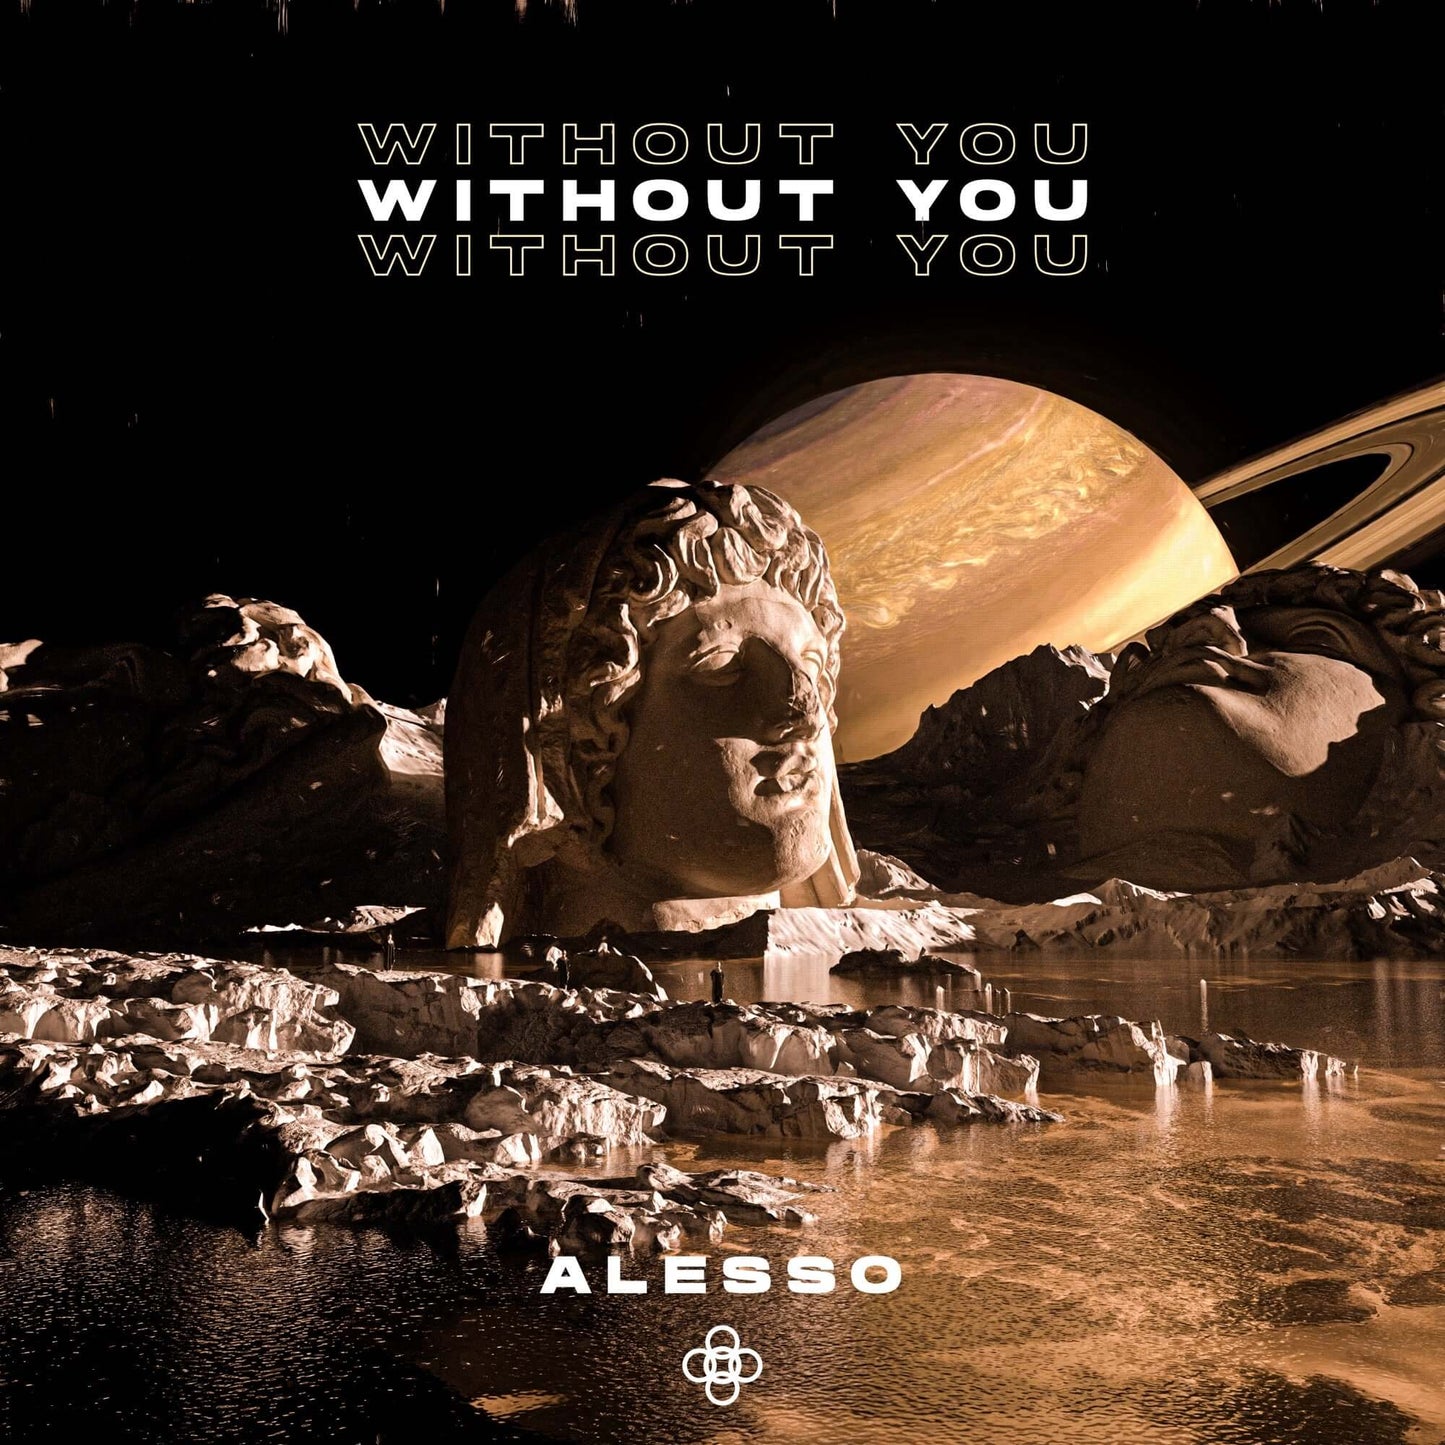 Alesso - Without You (Studio Acapella)